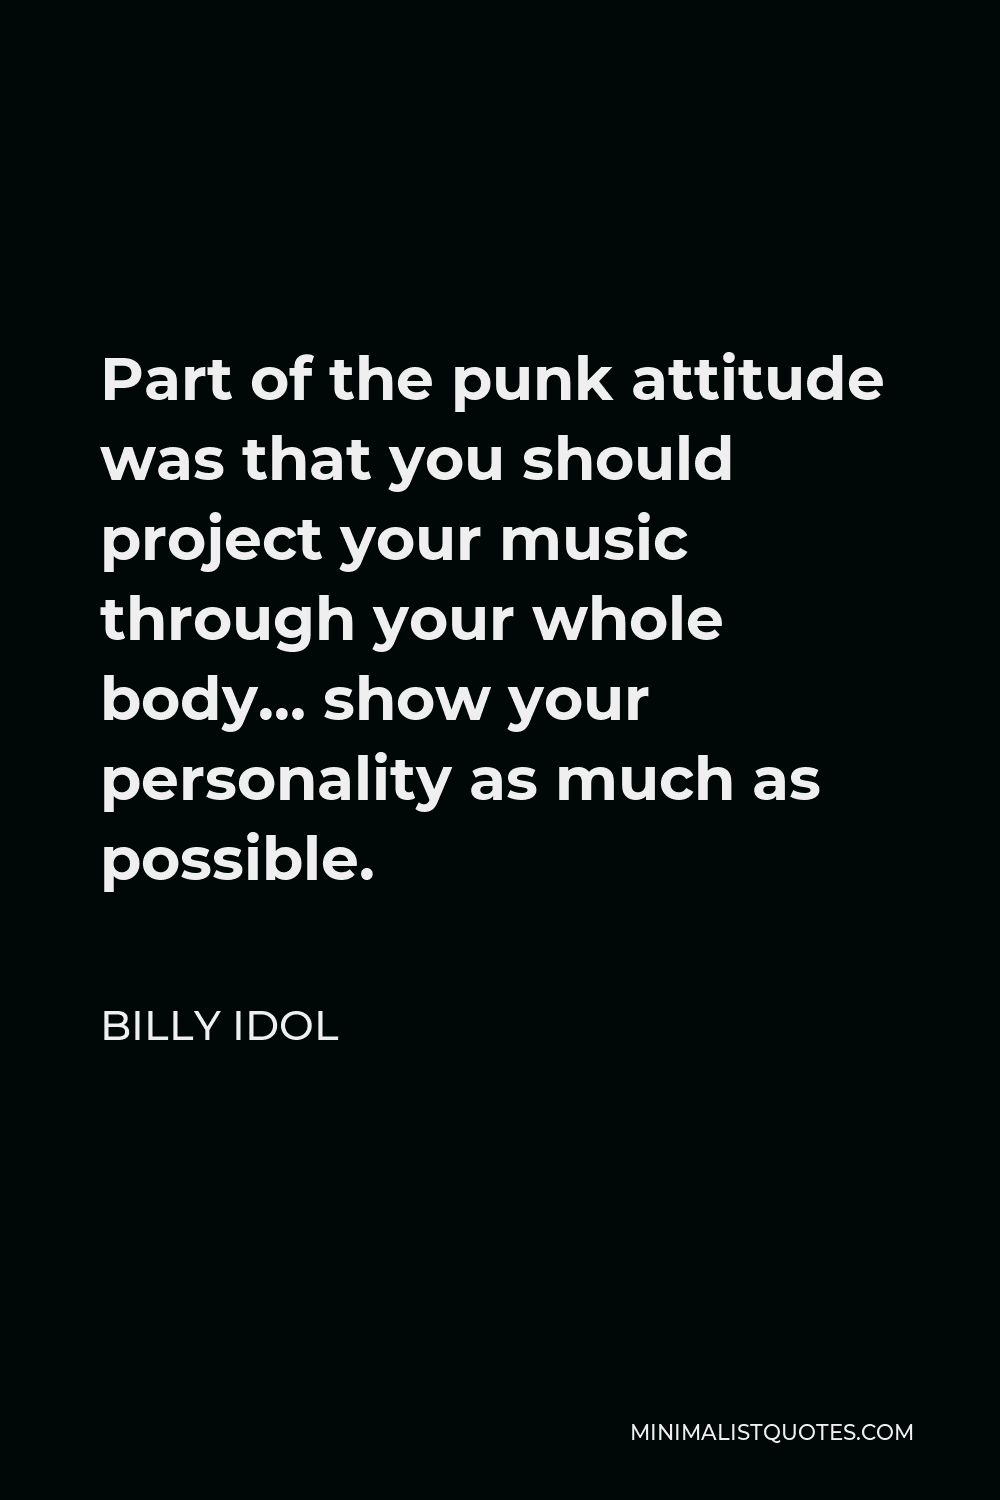 Billy Idol Quote - Part of the punk attitude was that you should project your music through your whole body… show your personality as much as possible.